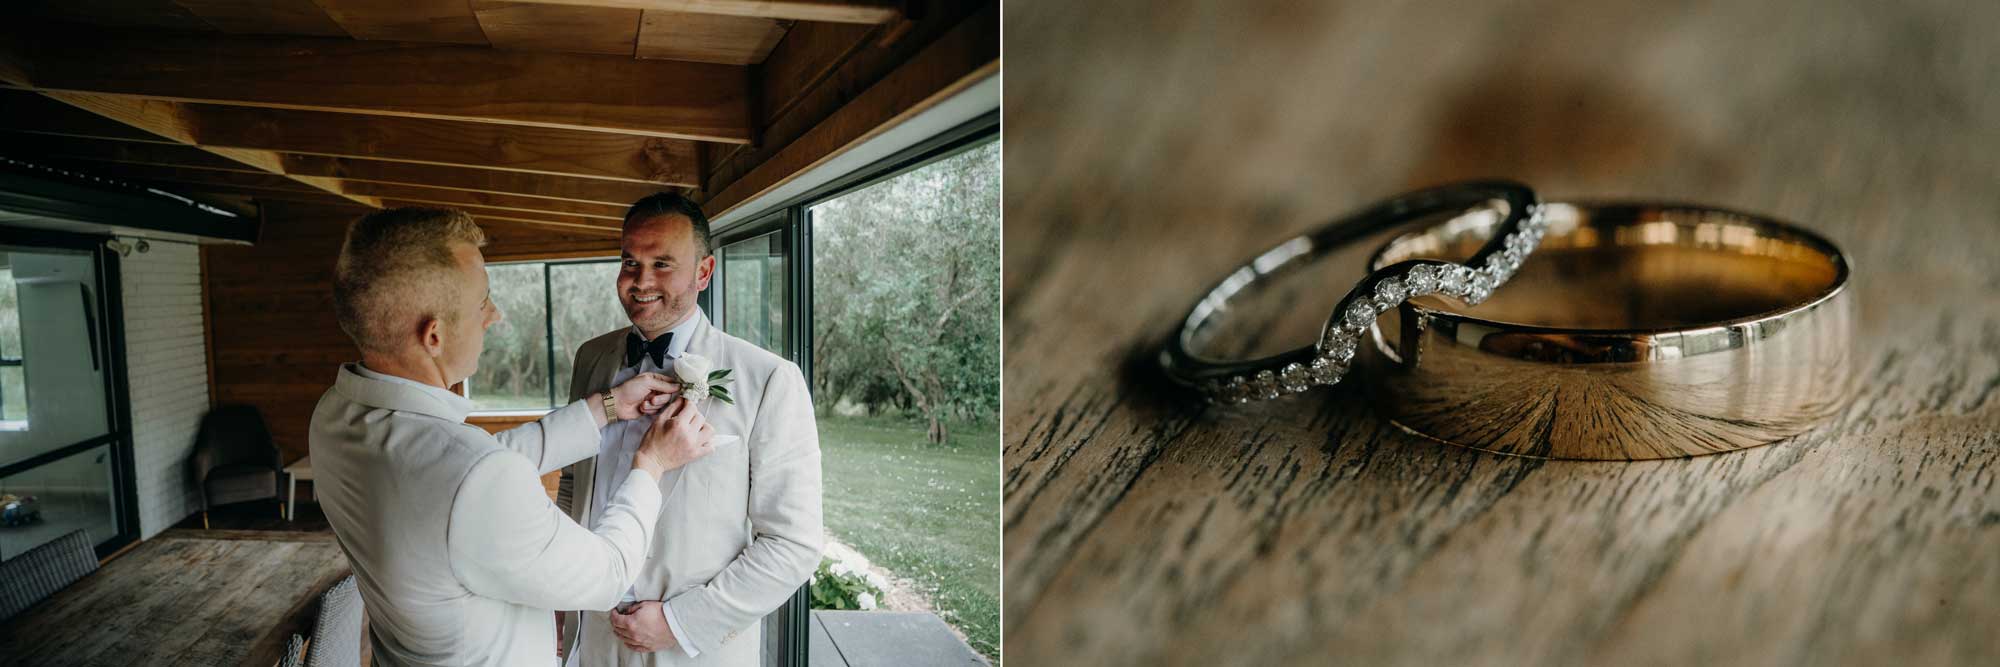 Groomsmen getting ready and wedding rings at Bracu Estate in Auckland photo by Sarah Weber Photography